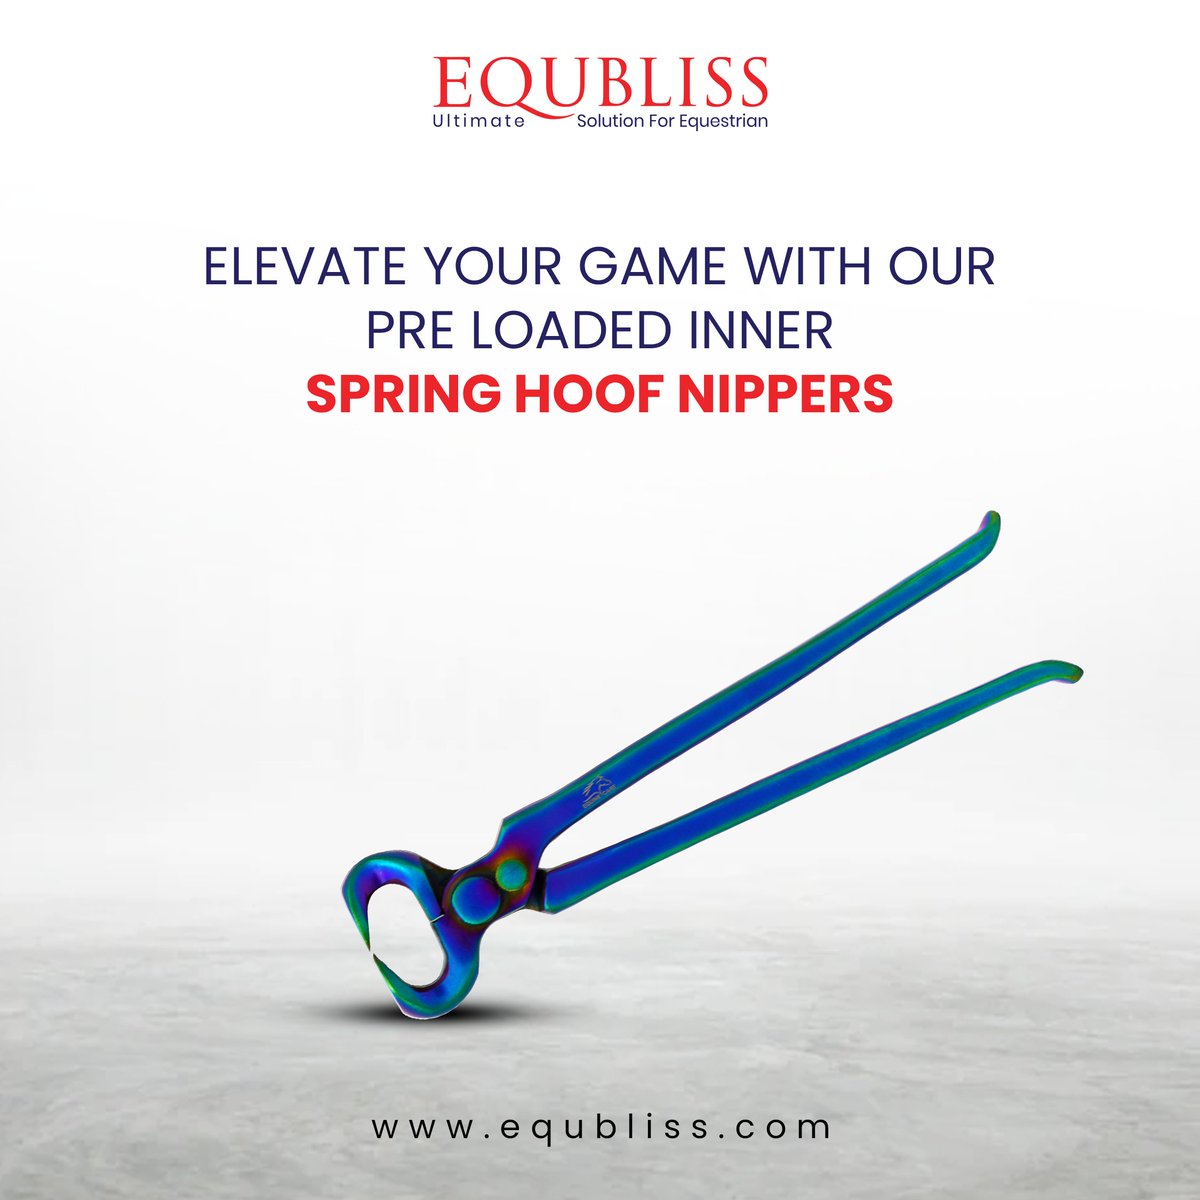 🔗 Explore our wide range of horse grooming products, including horse boots, farrier aprons, saddle pads, and more on our website at equbliss.com 

#Equbliss #HorseGrooming #FarrierTools #HoofNippers #QualityTools #ElevateYourGame #EqublissProducts #HorseCare